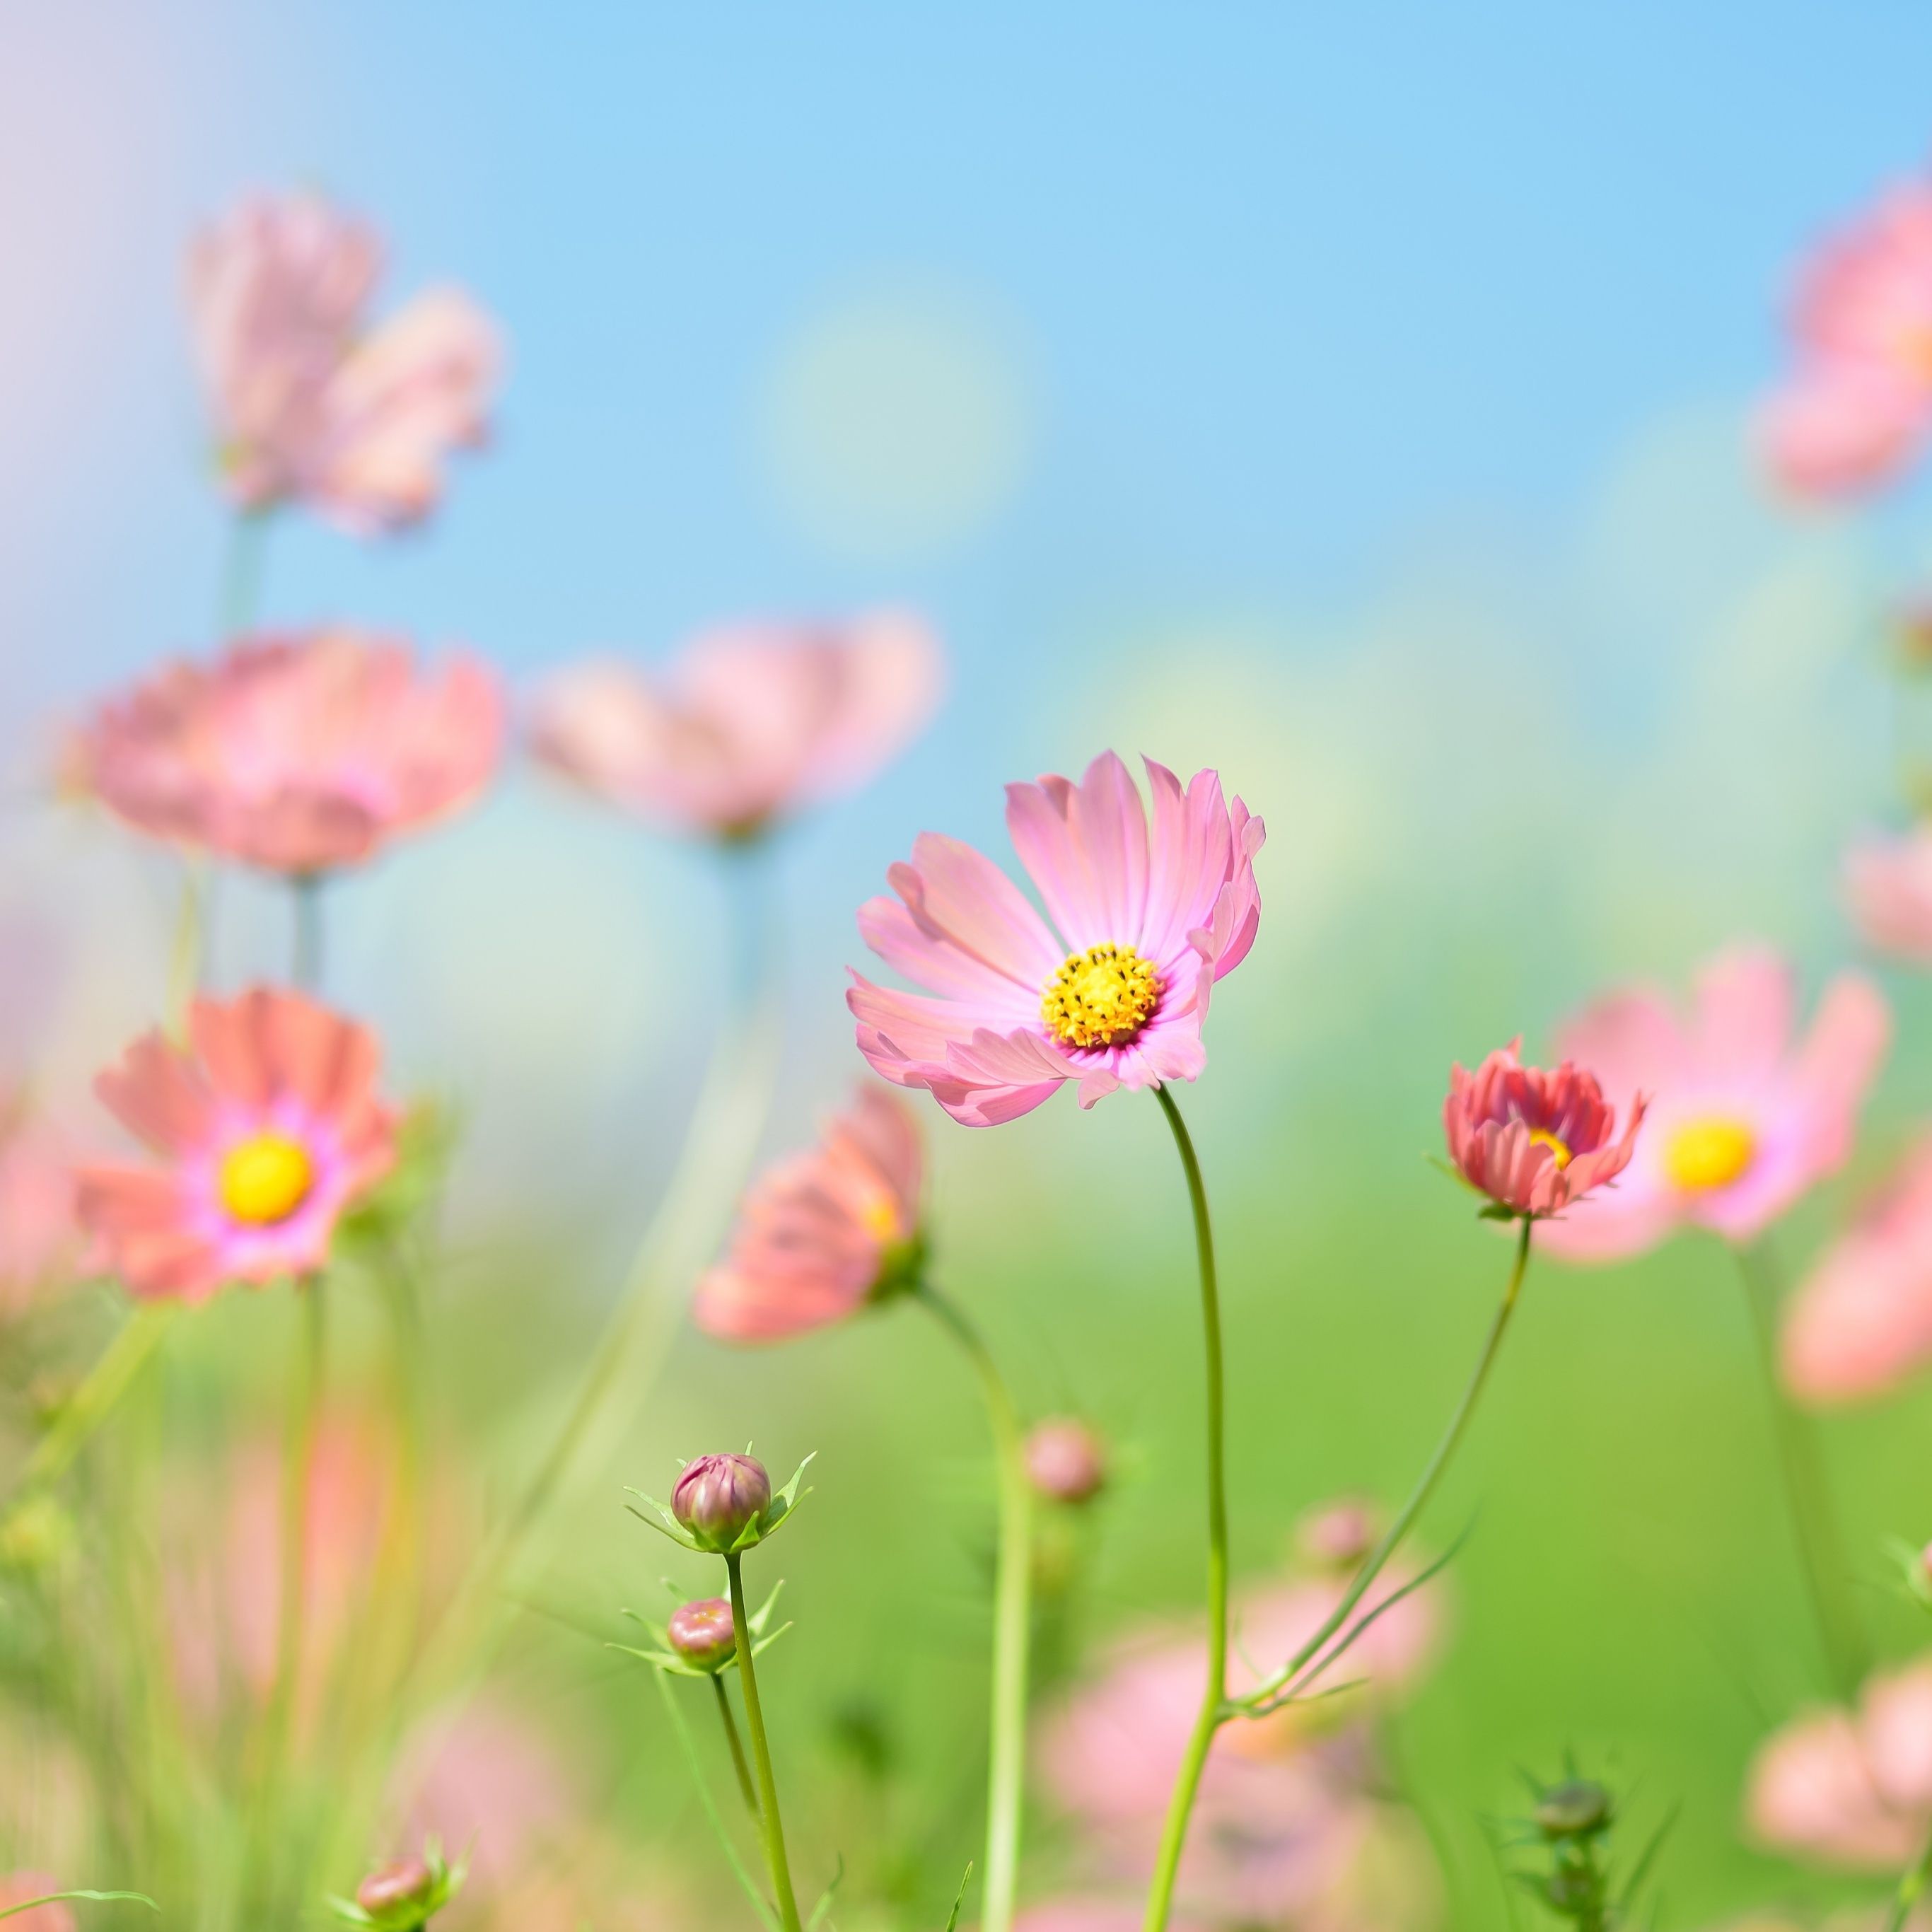 A field of pink flowers in the sun - Summer